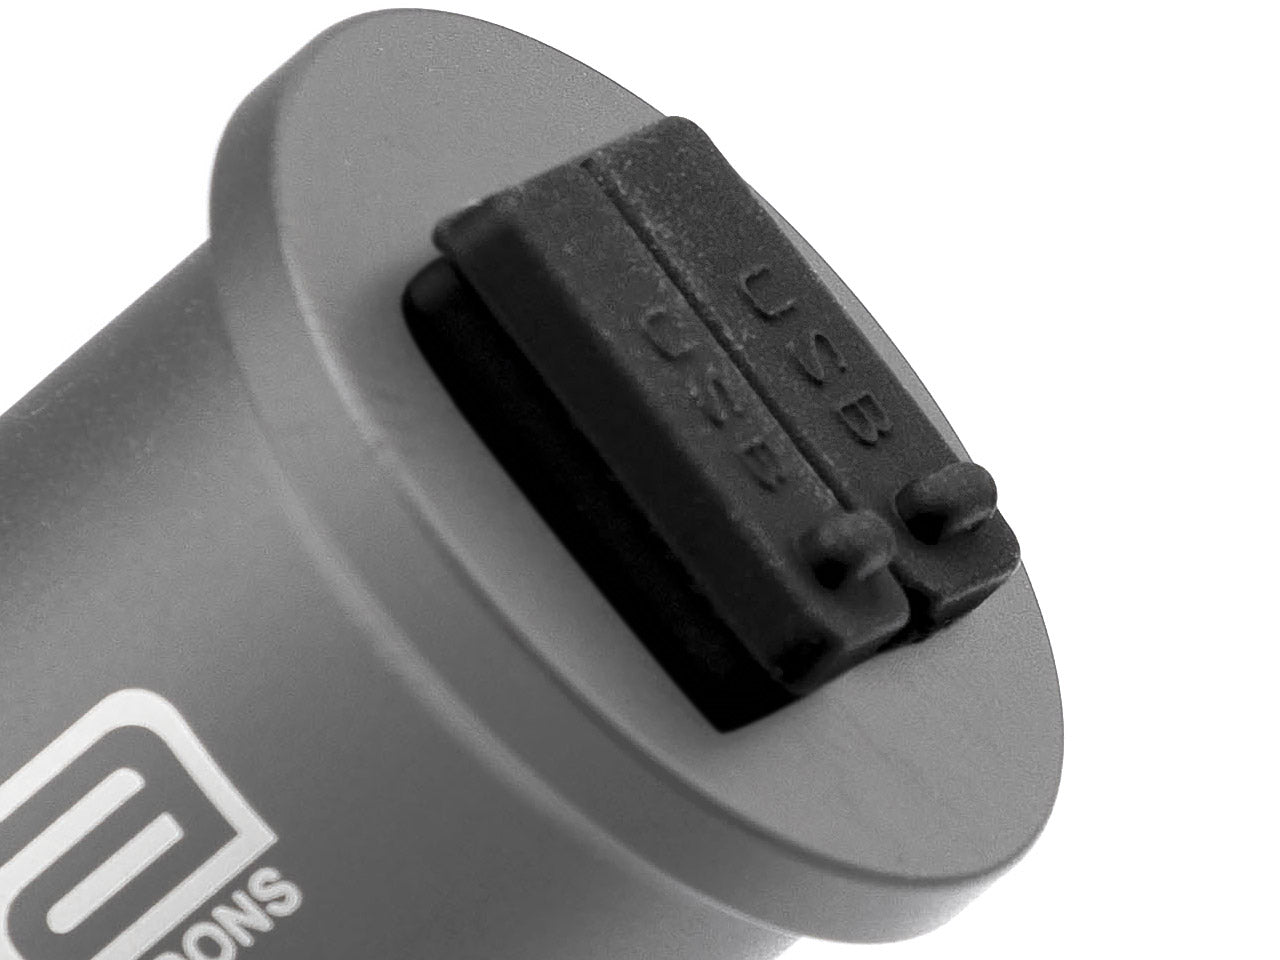 Waterproof usb port covers replacement